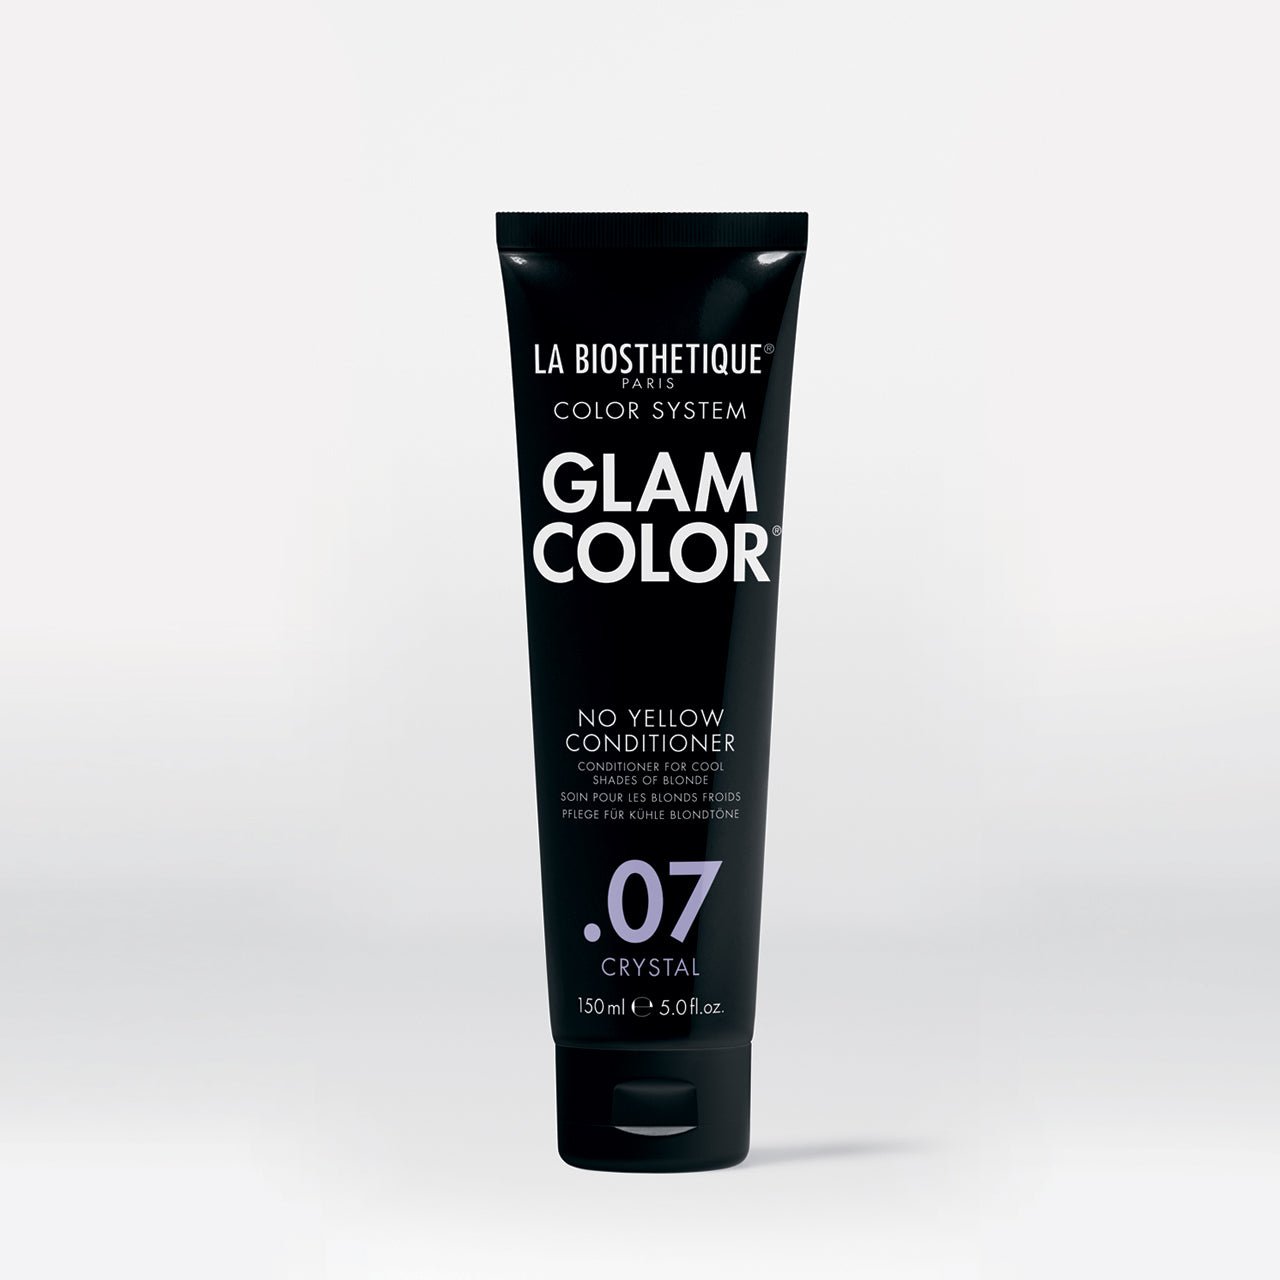 La Biosthetique Glam Color No Yellow Conditioner .07 Crystal 150ml - shelley and co